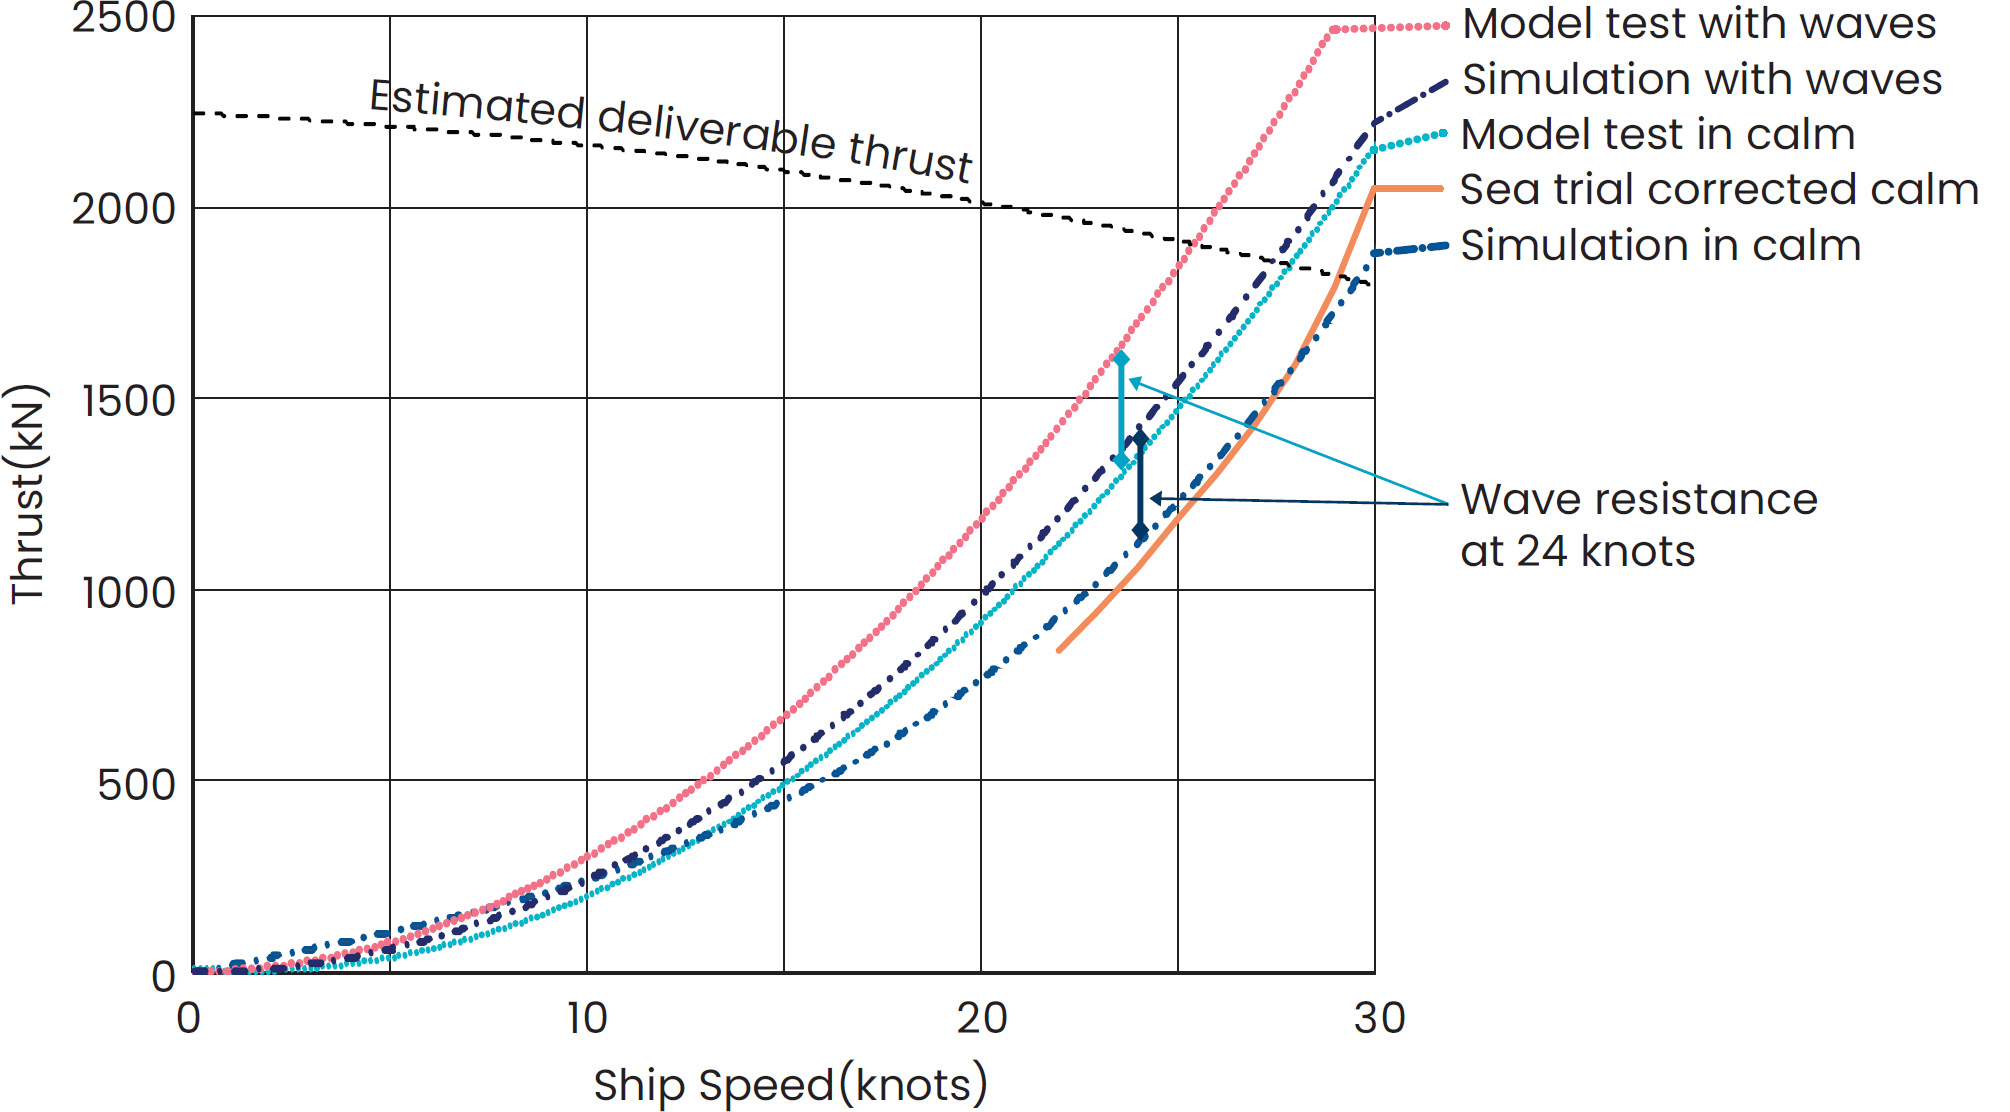 Hull resistance in calm sea and a single sea condition, comparing the model test, simulation and sea trial corrected values.